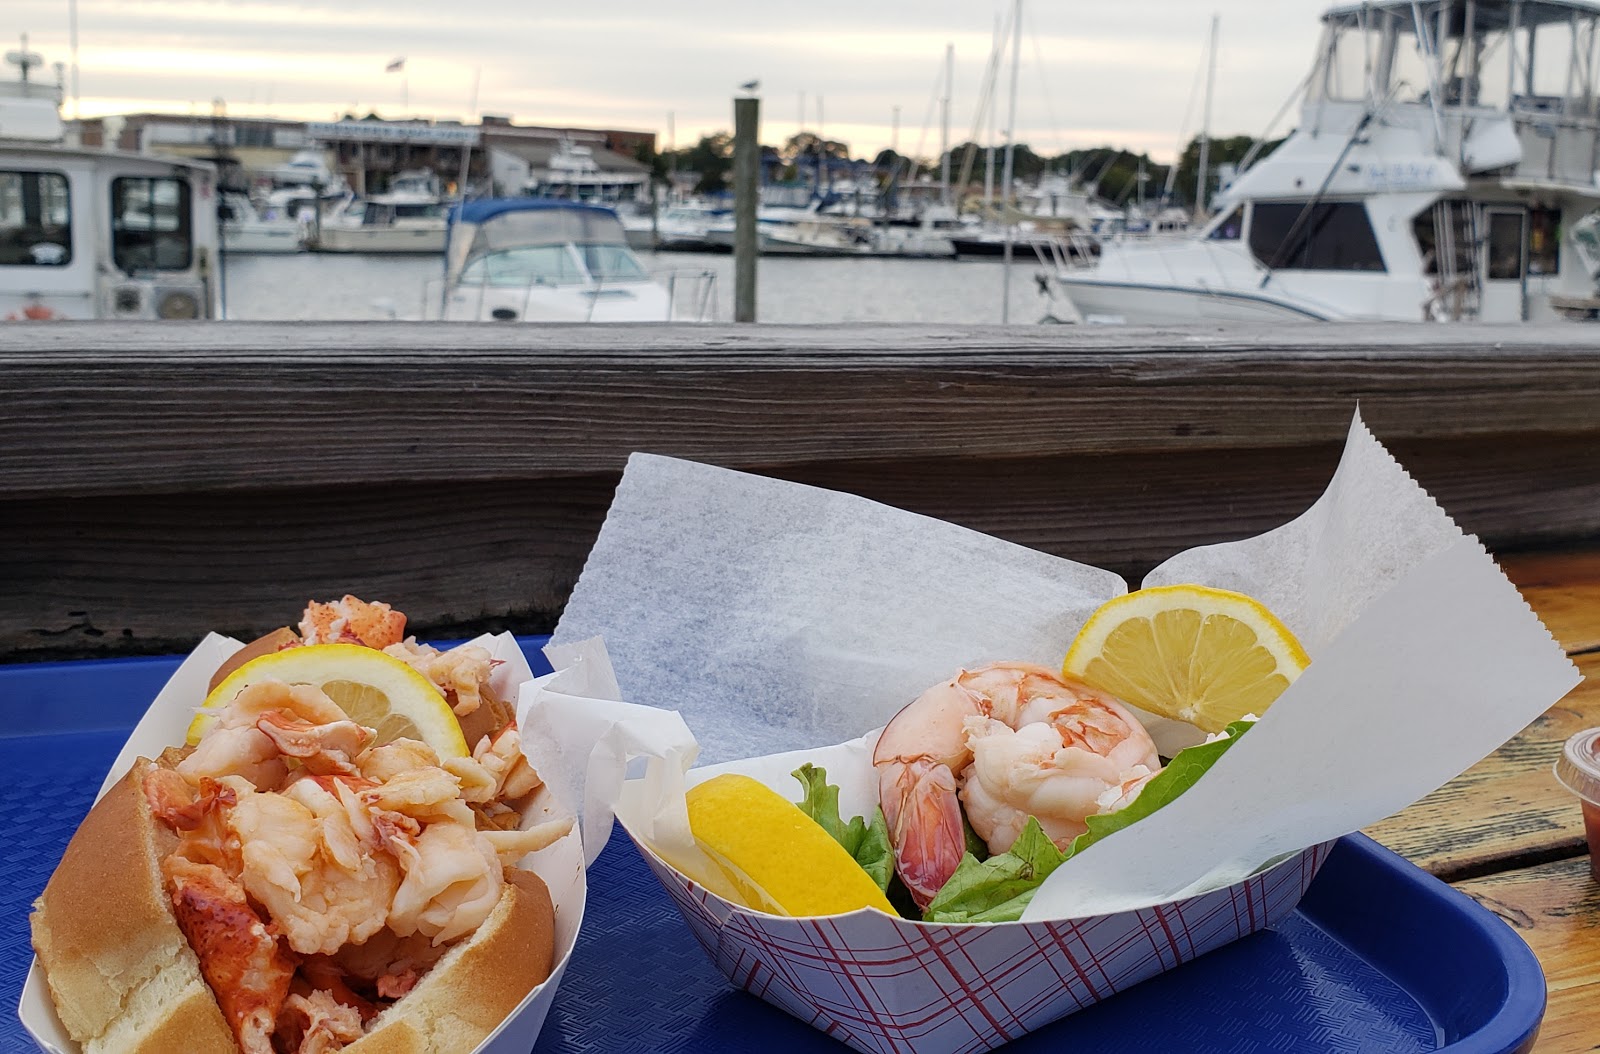 A lobster roll and plate of shrimp sit on a picnic table overlooking boats in the marina